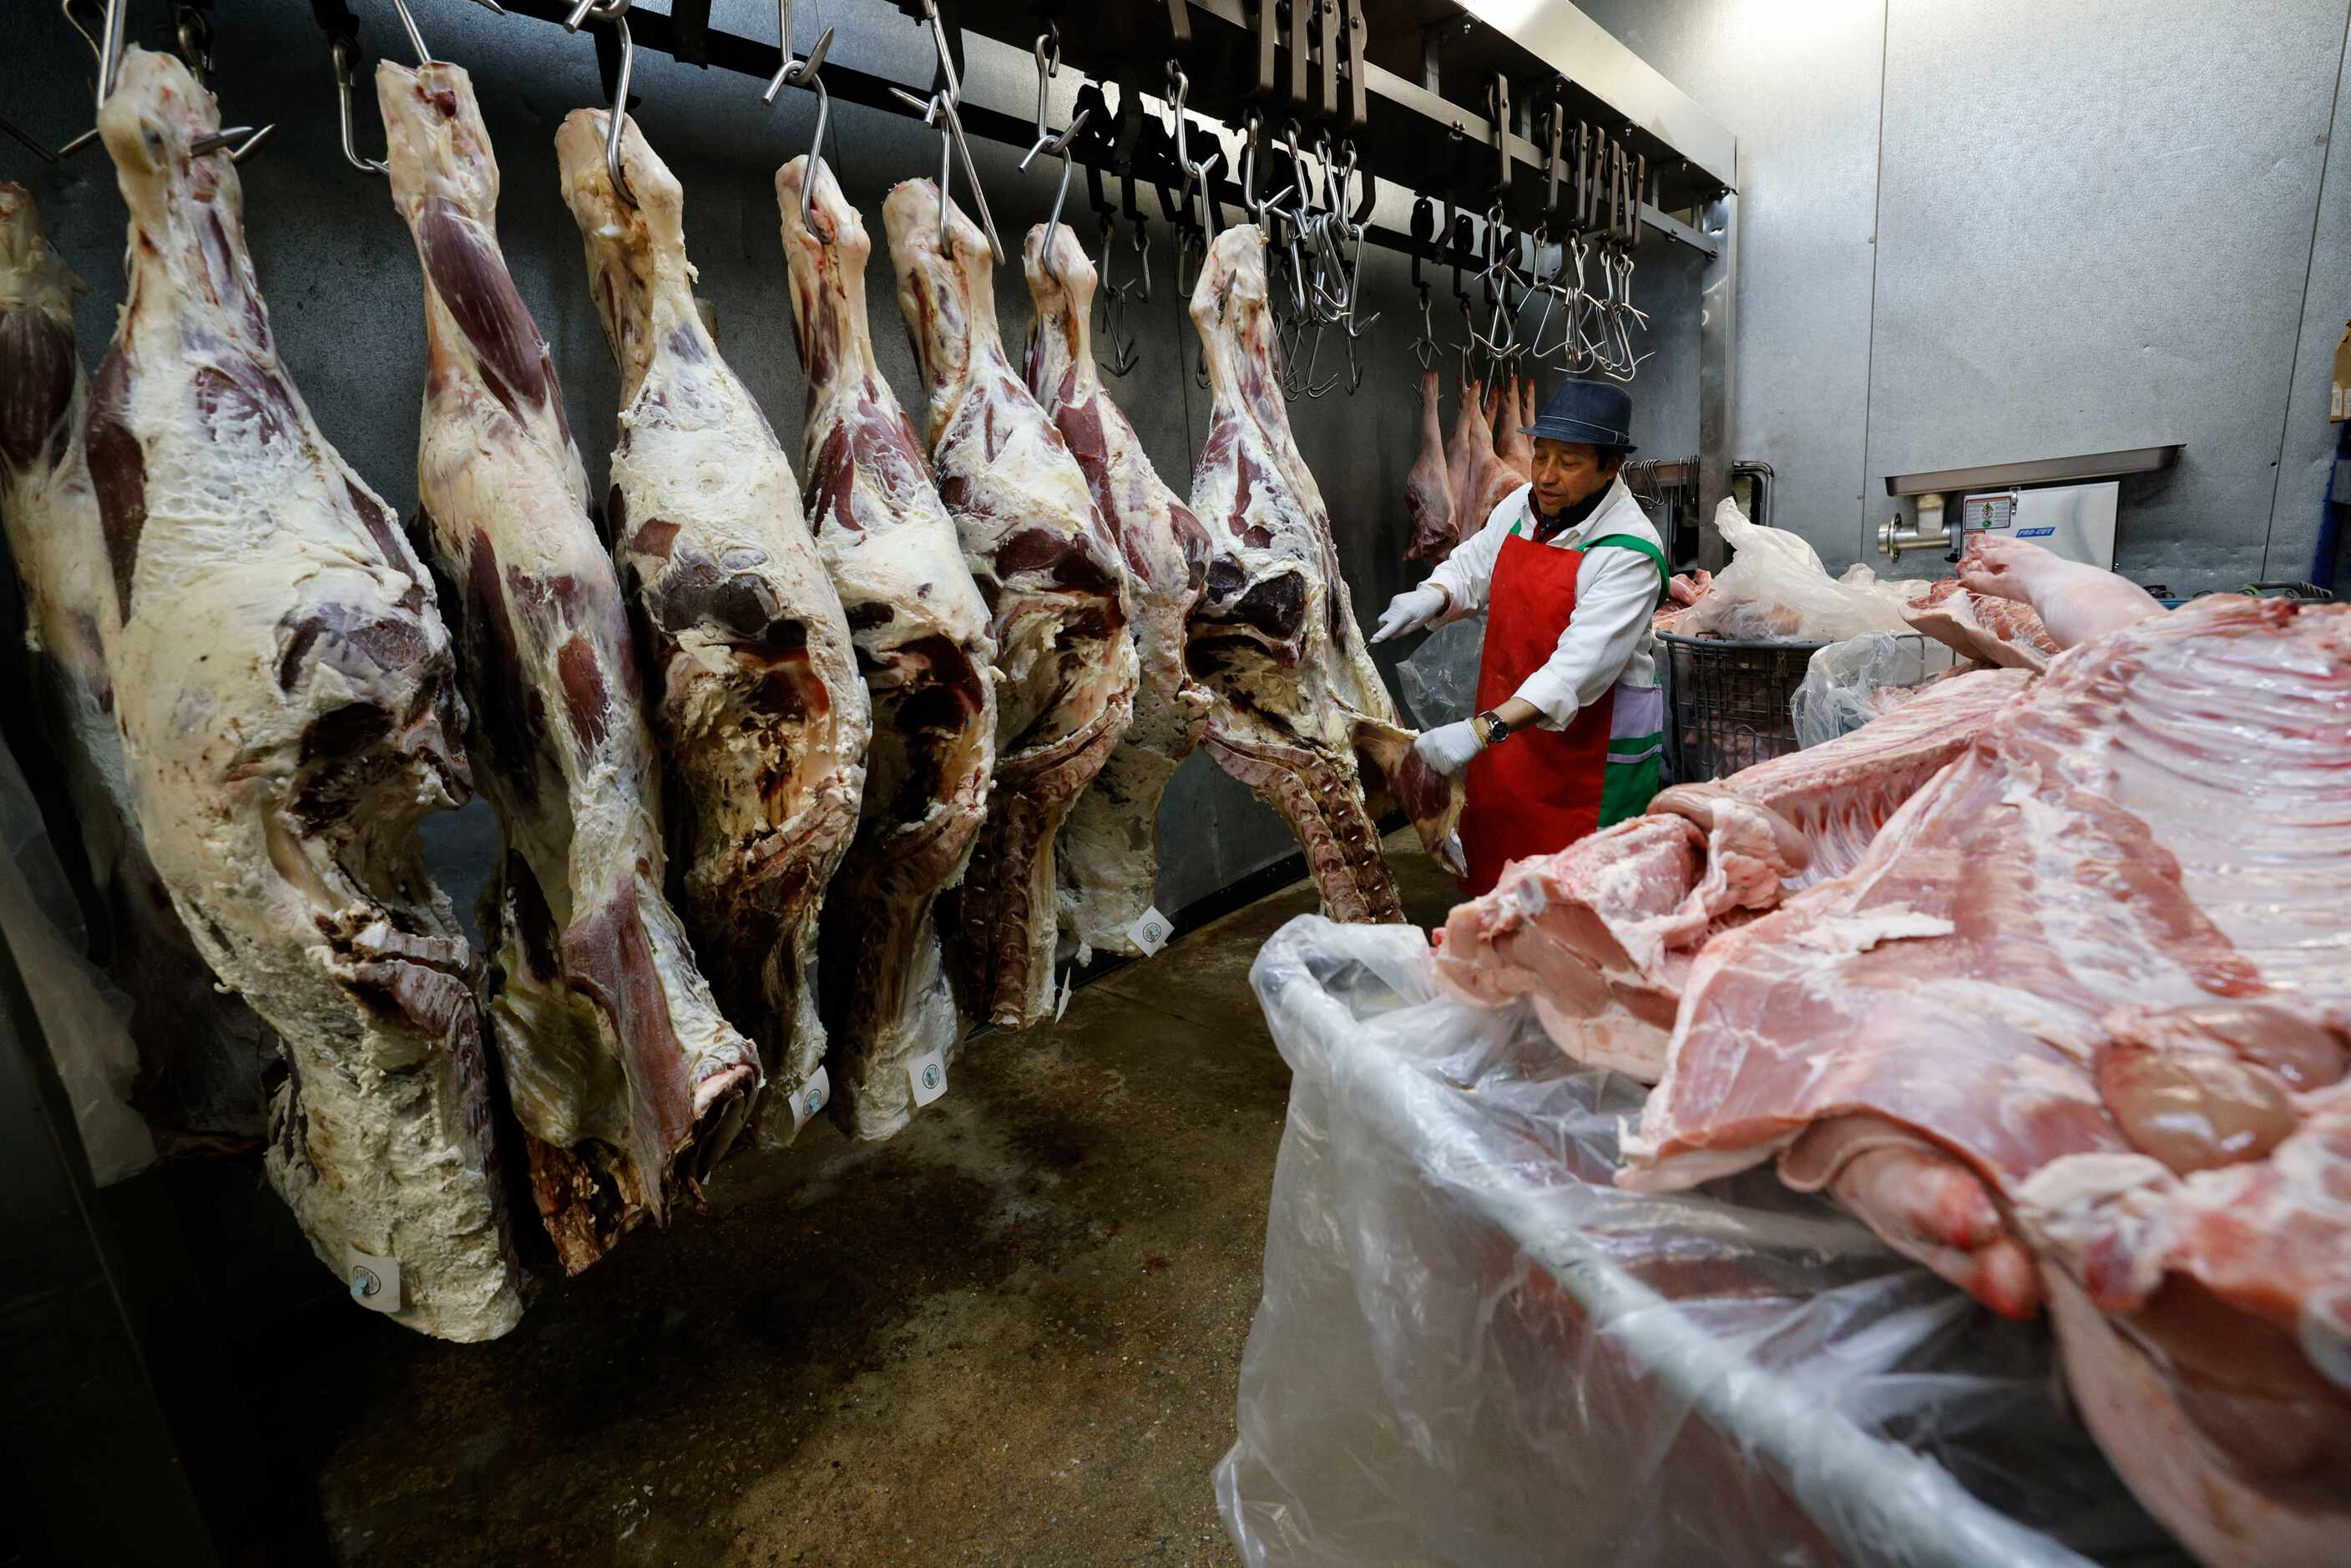 Antonio Rodar works at the meat department in Hong Kong Marketplace at Asia Times Square,...